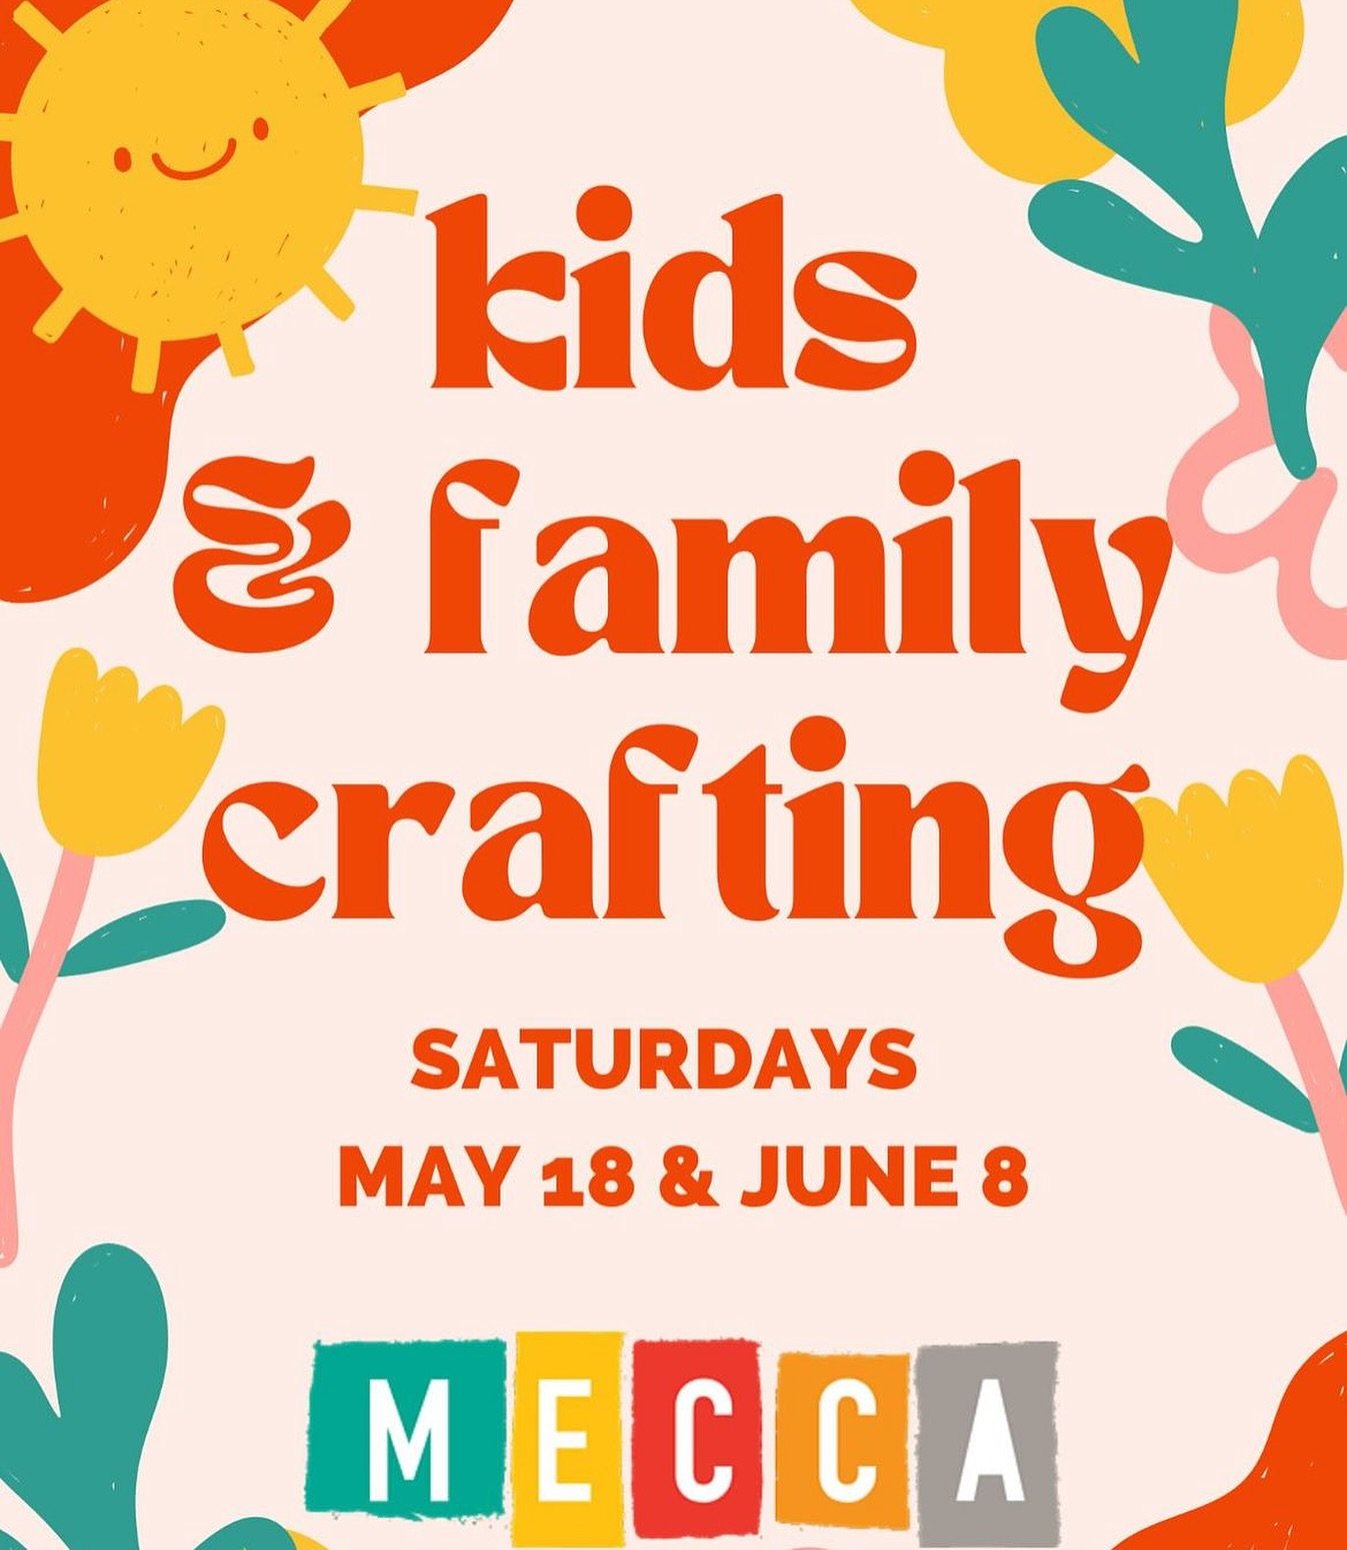 Mark your Calendars, one of @meccaeugene favorite events is happening this weekend! 👏🏽

Early Childhood educator, Nellie Huggins will be in house teaching fun upcycled craft projects, with smaller group options available too. 

Be sure to give @mec